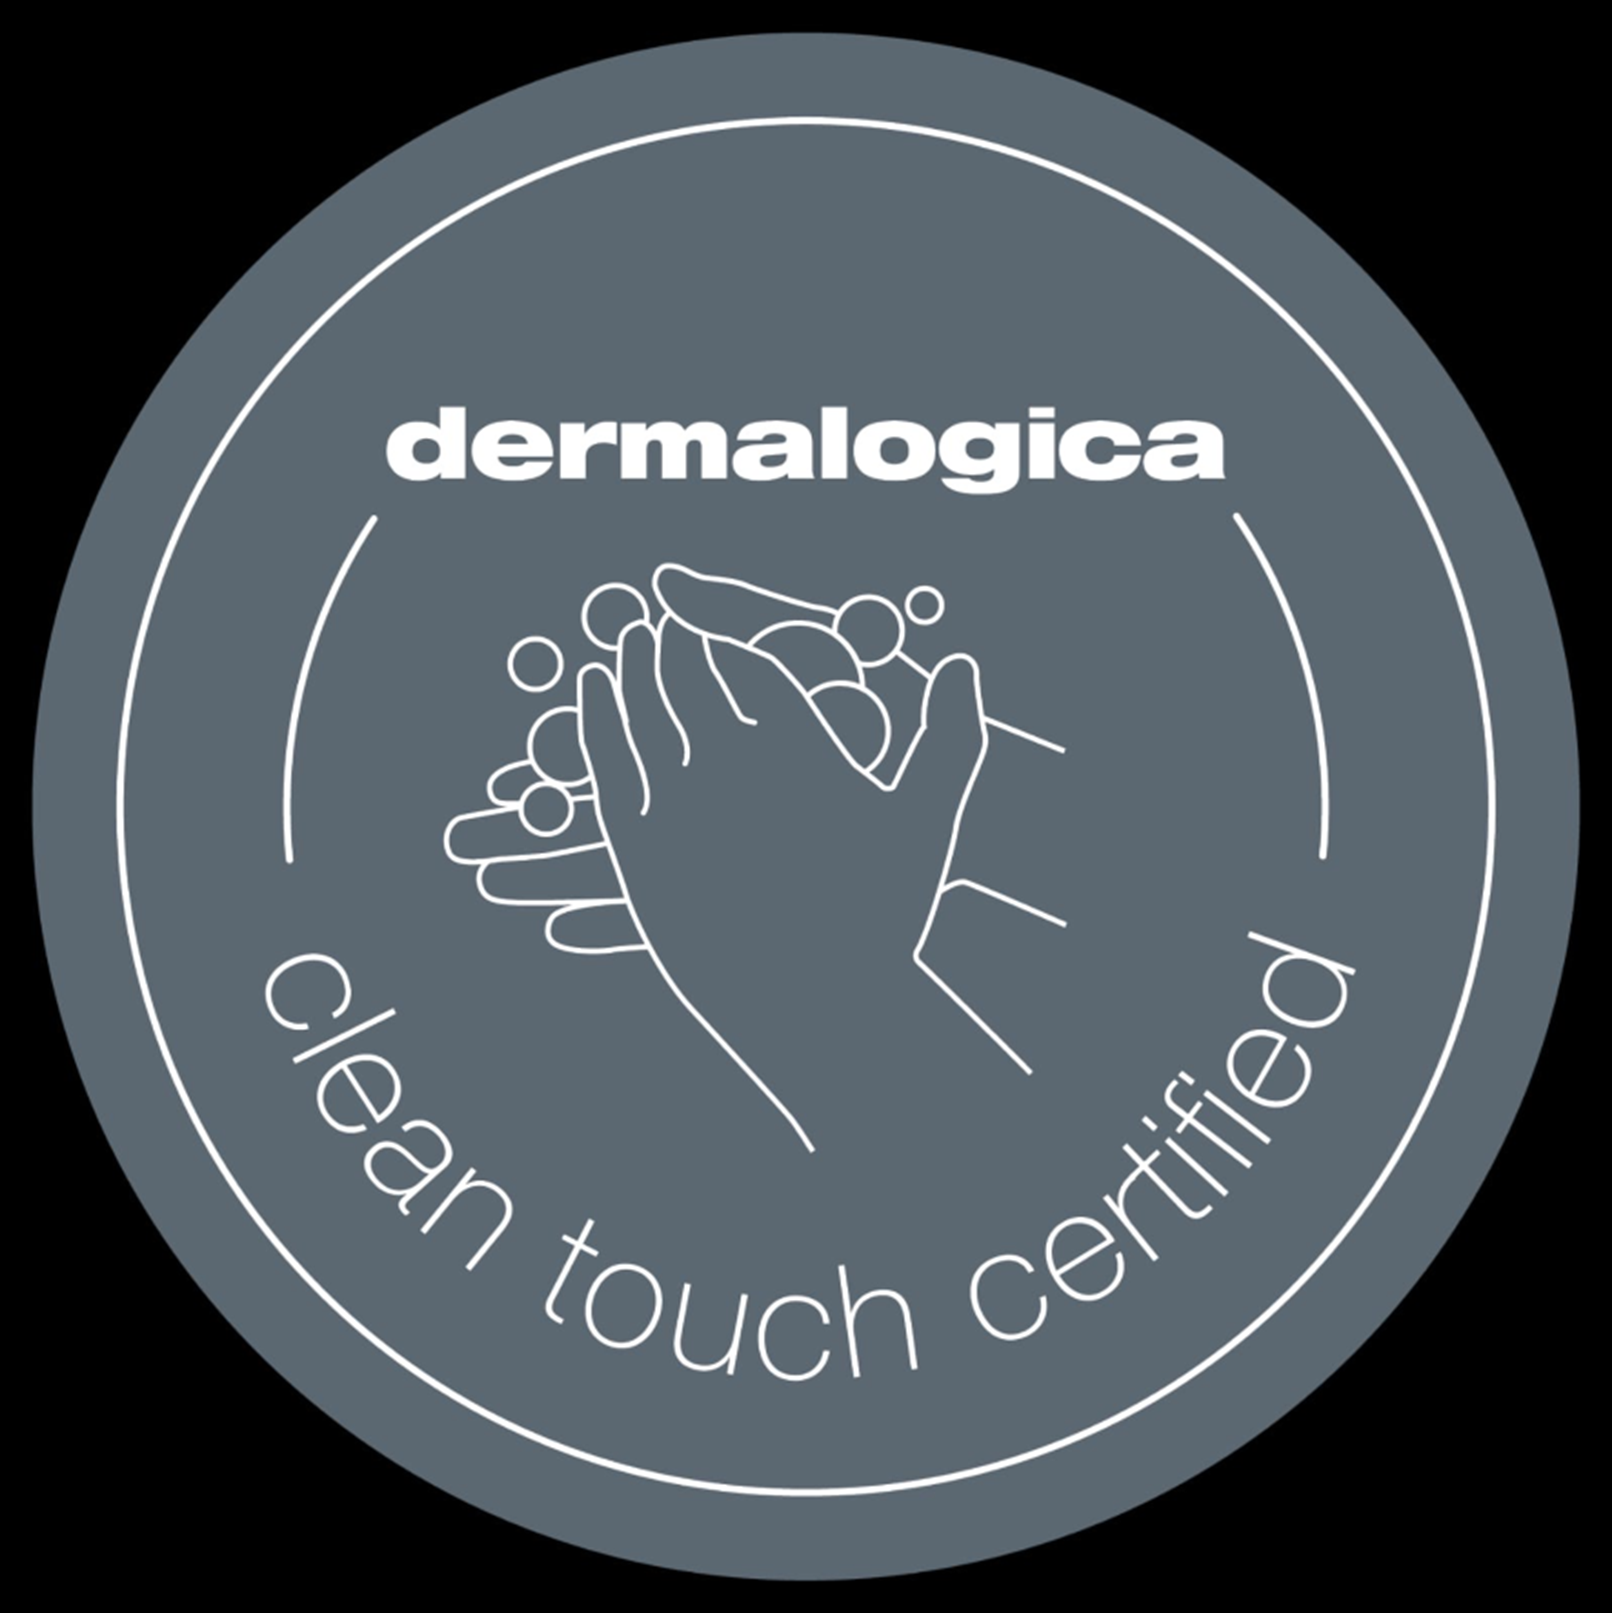 Clean Touch Certified by Dermalogica Carriage Works Dental